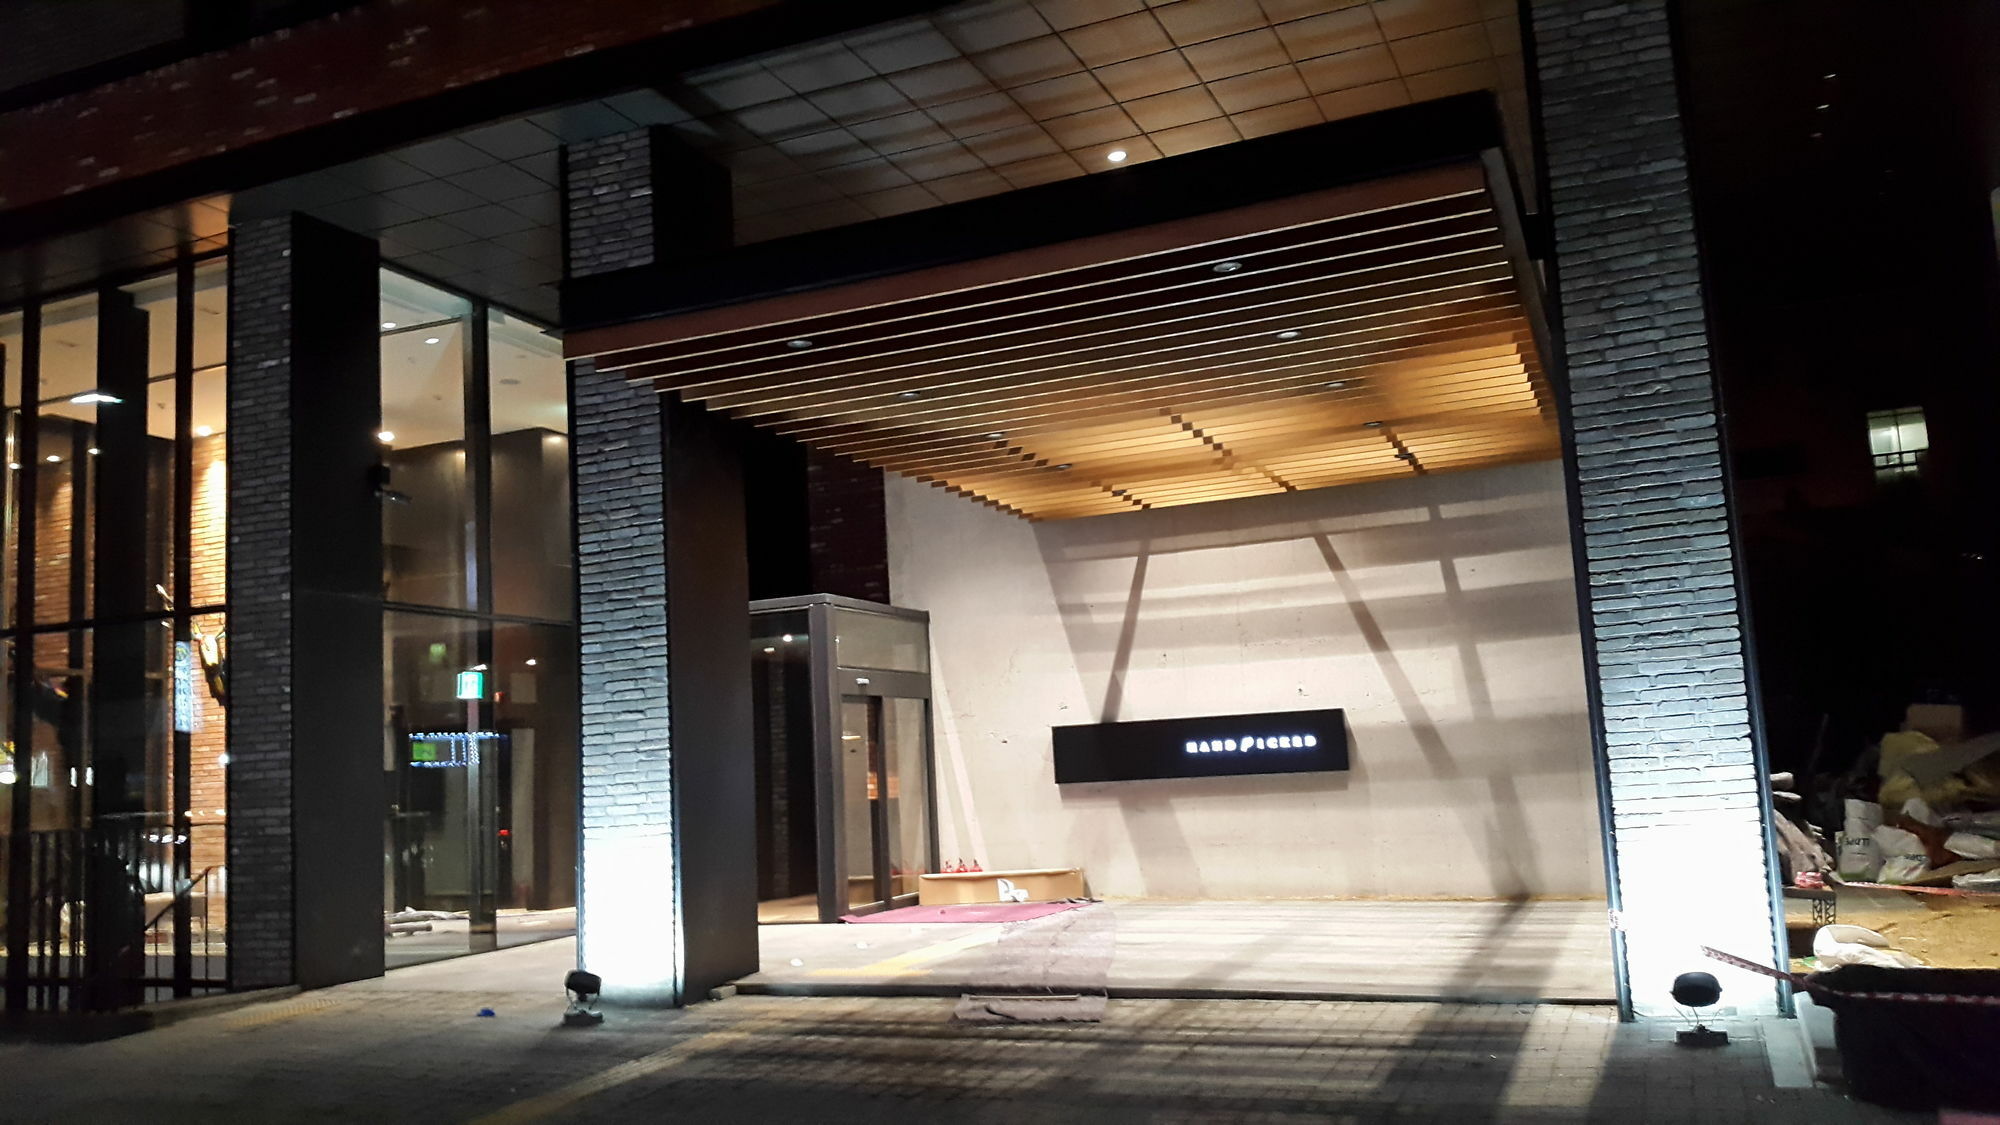 Handpicked Hotel & Collections Seoul Exterior photo